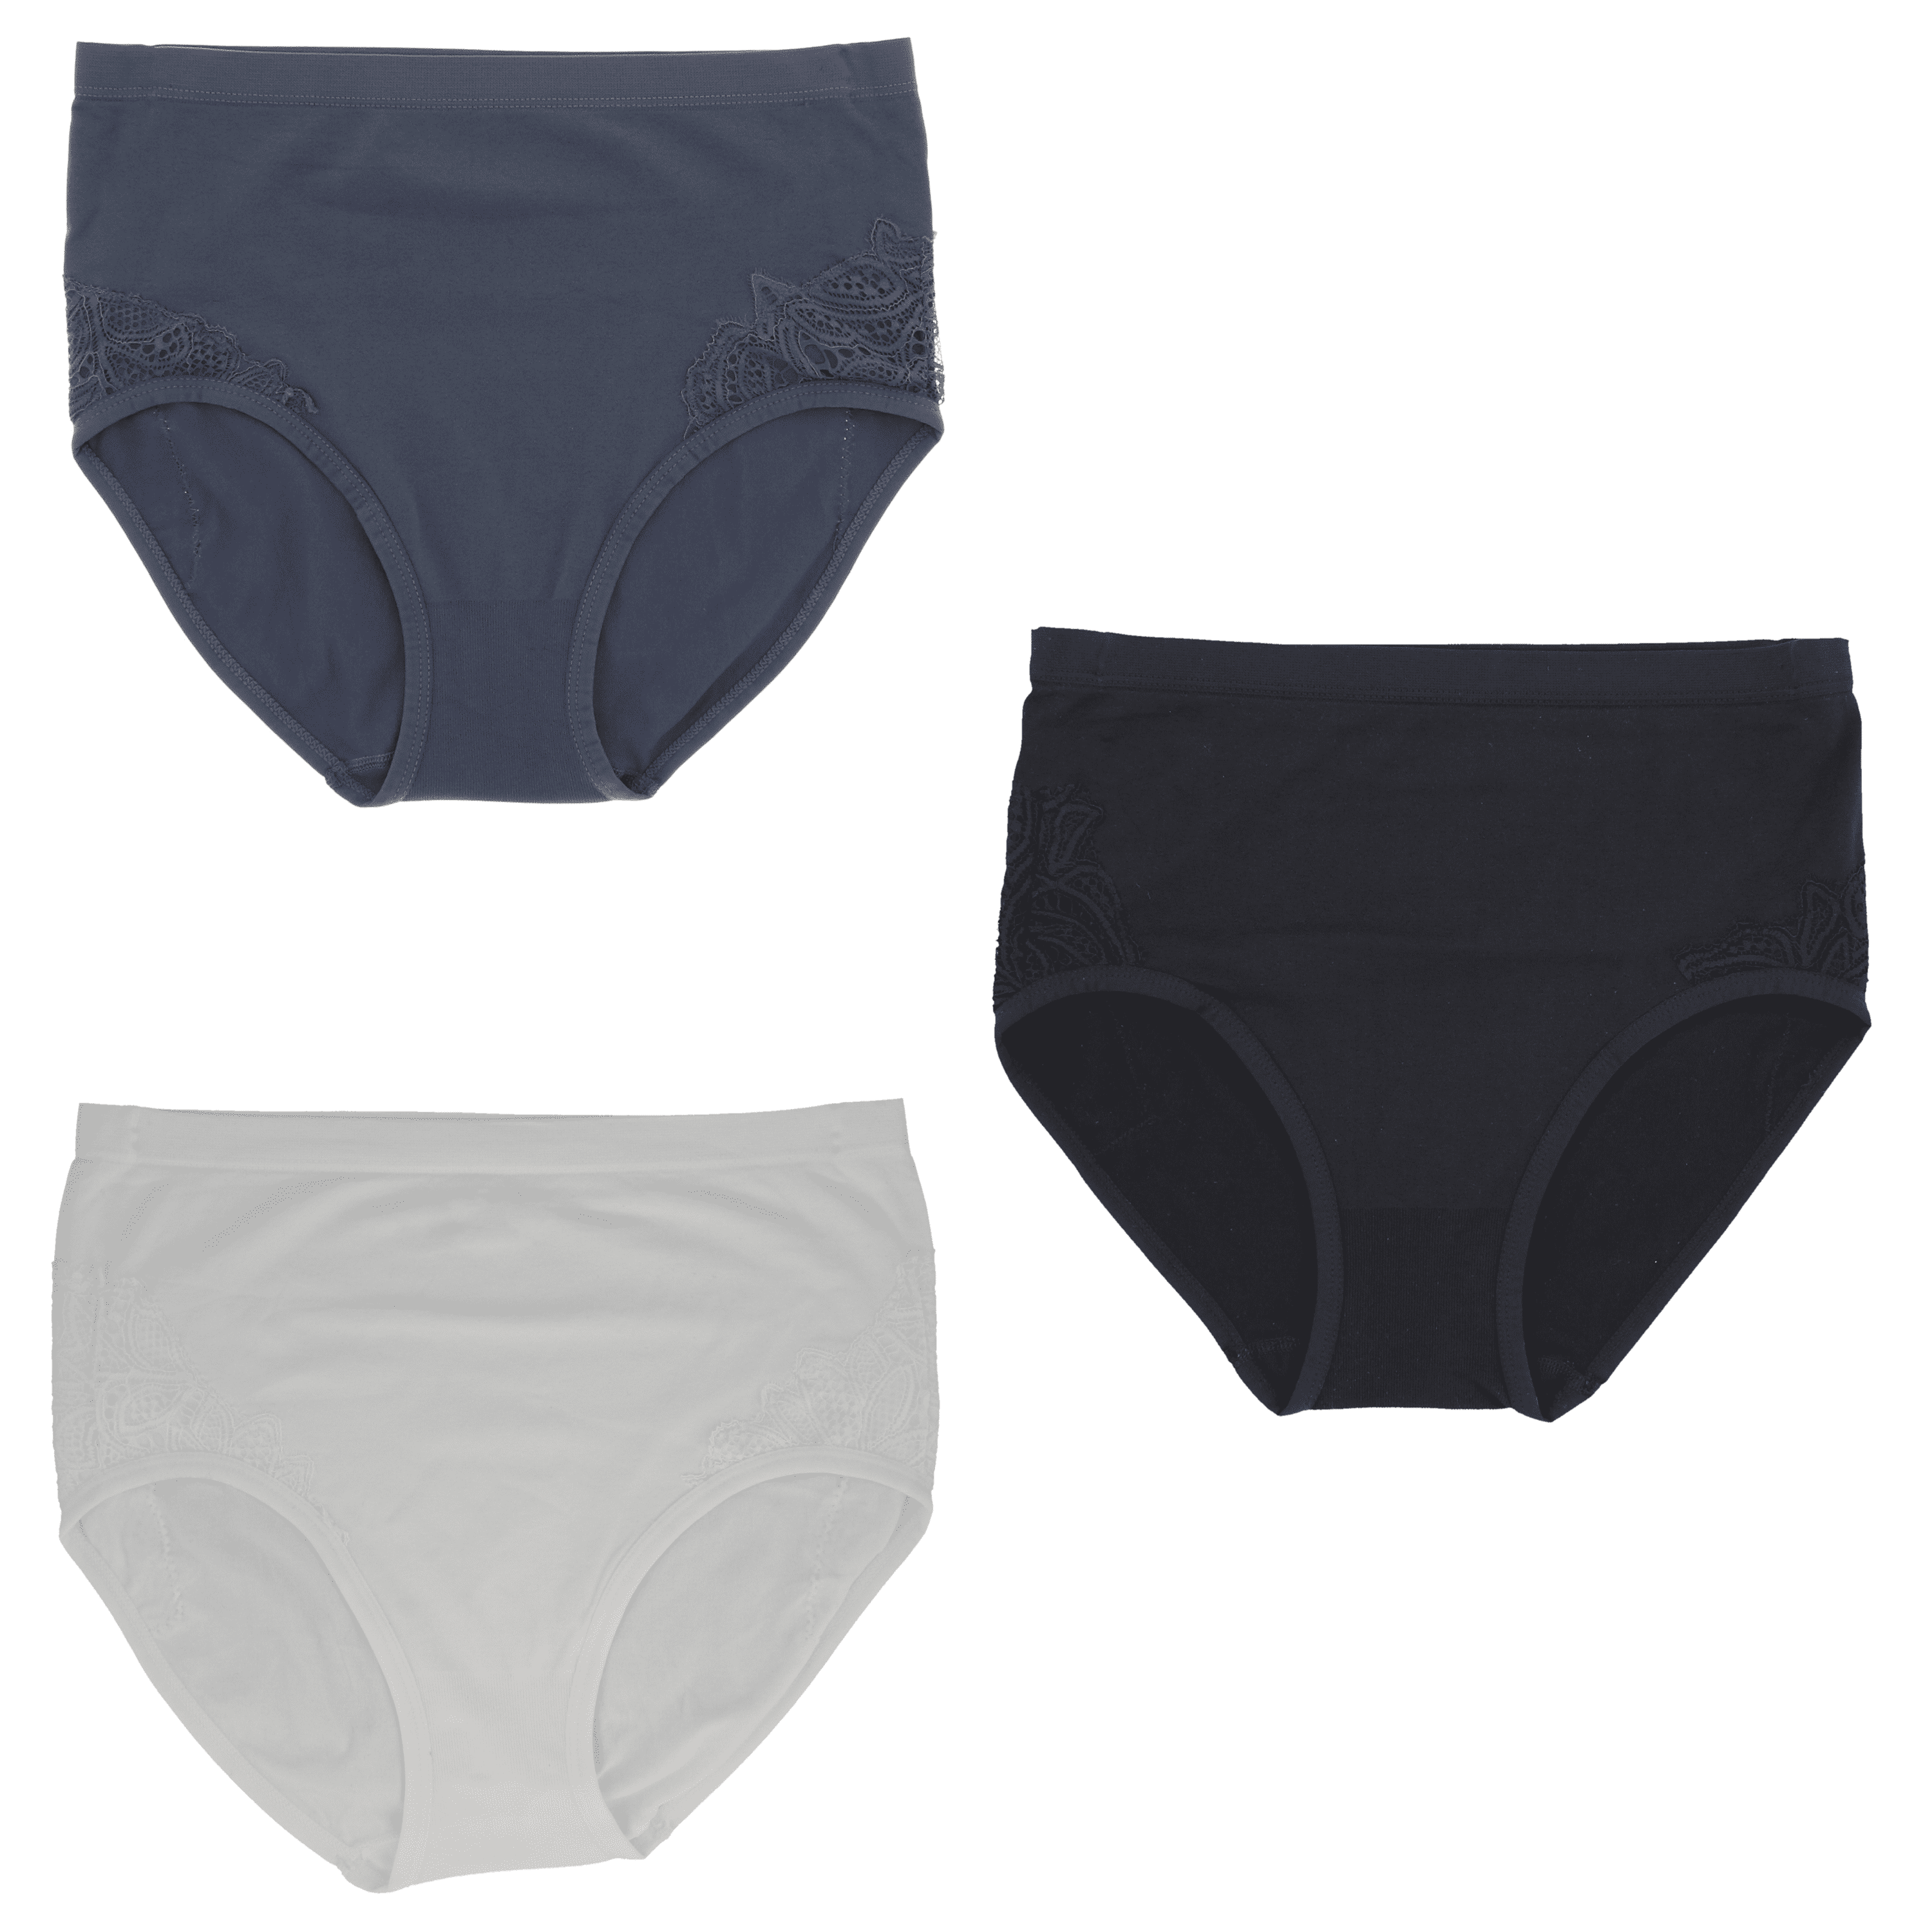 Details about   BNWT DELTA BURKE 3 Three Pack Knickers Briefs Size 2XL 